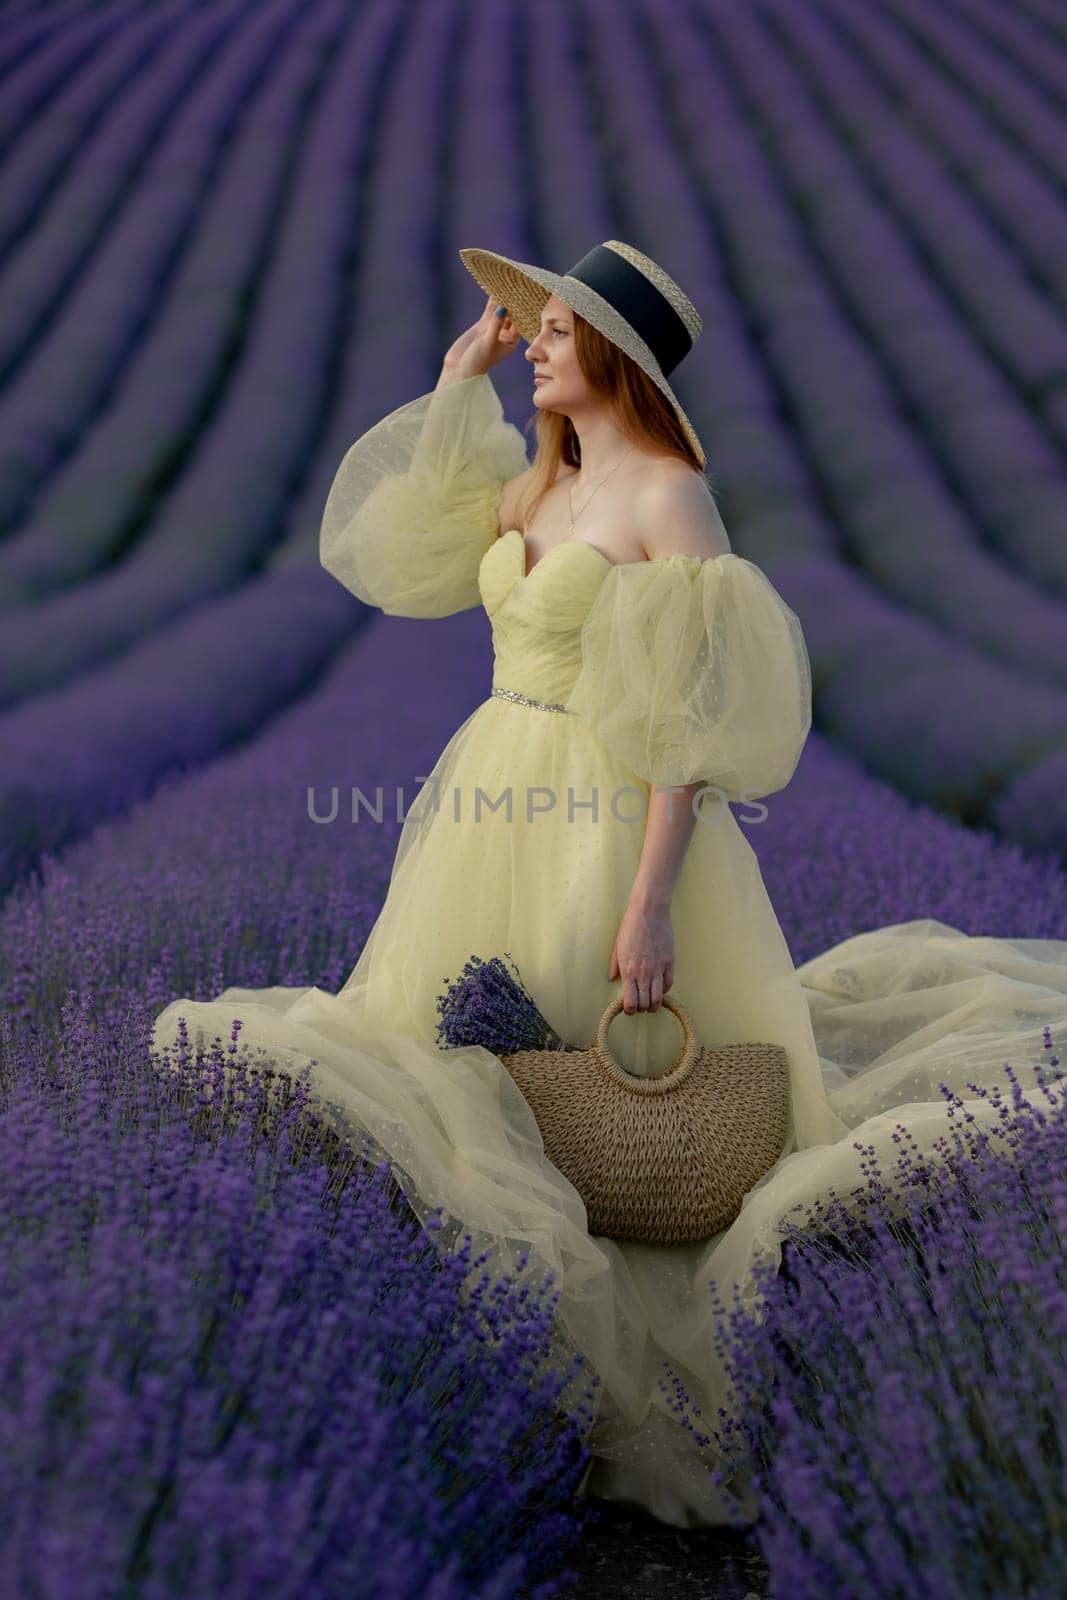 Lavender field happy woman in yellow dress in lavender field summer time at sunset.